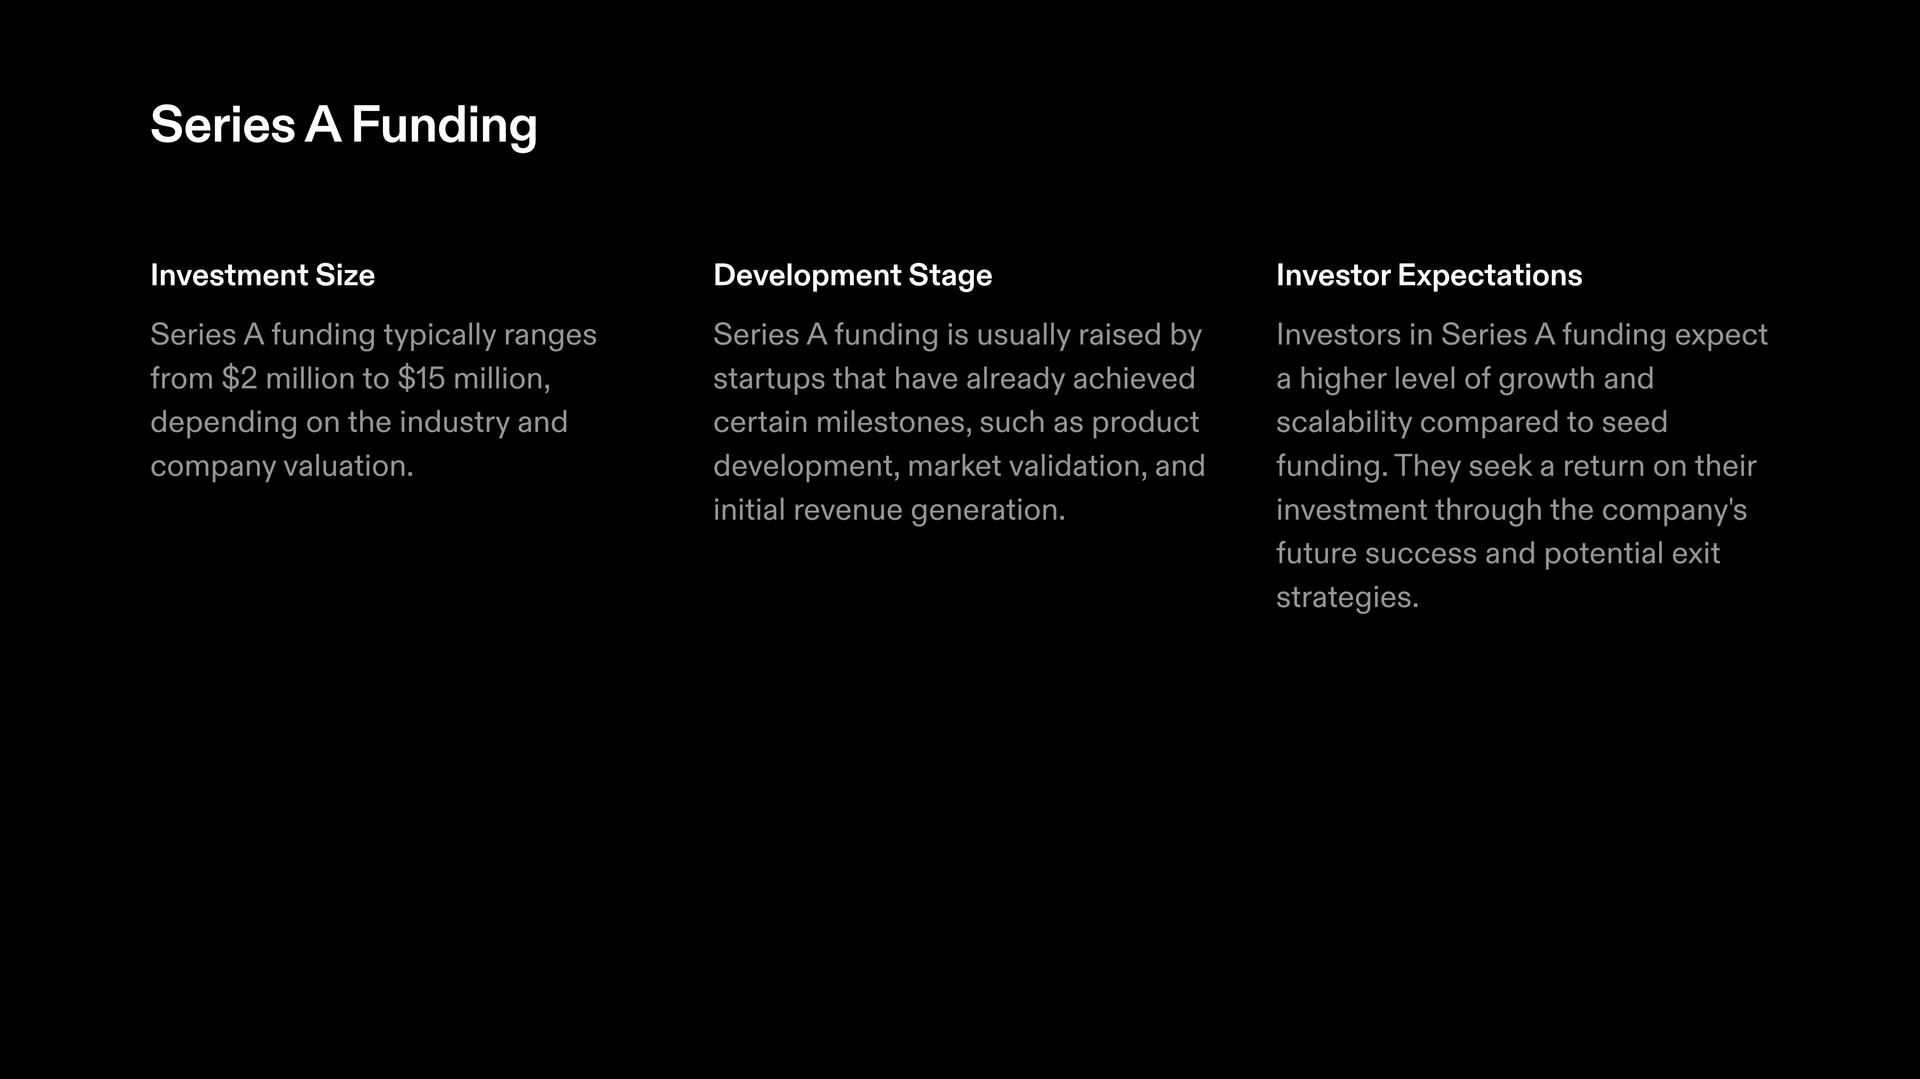 Series A Startup Funding: Investment size, development stage and investor expectations